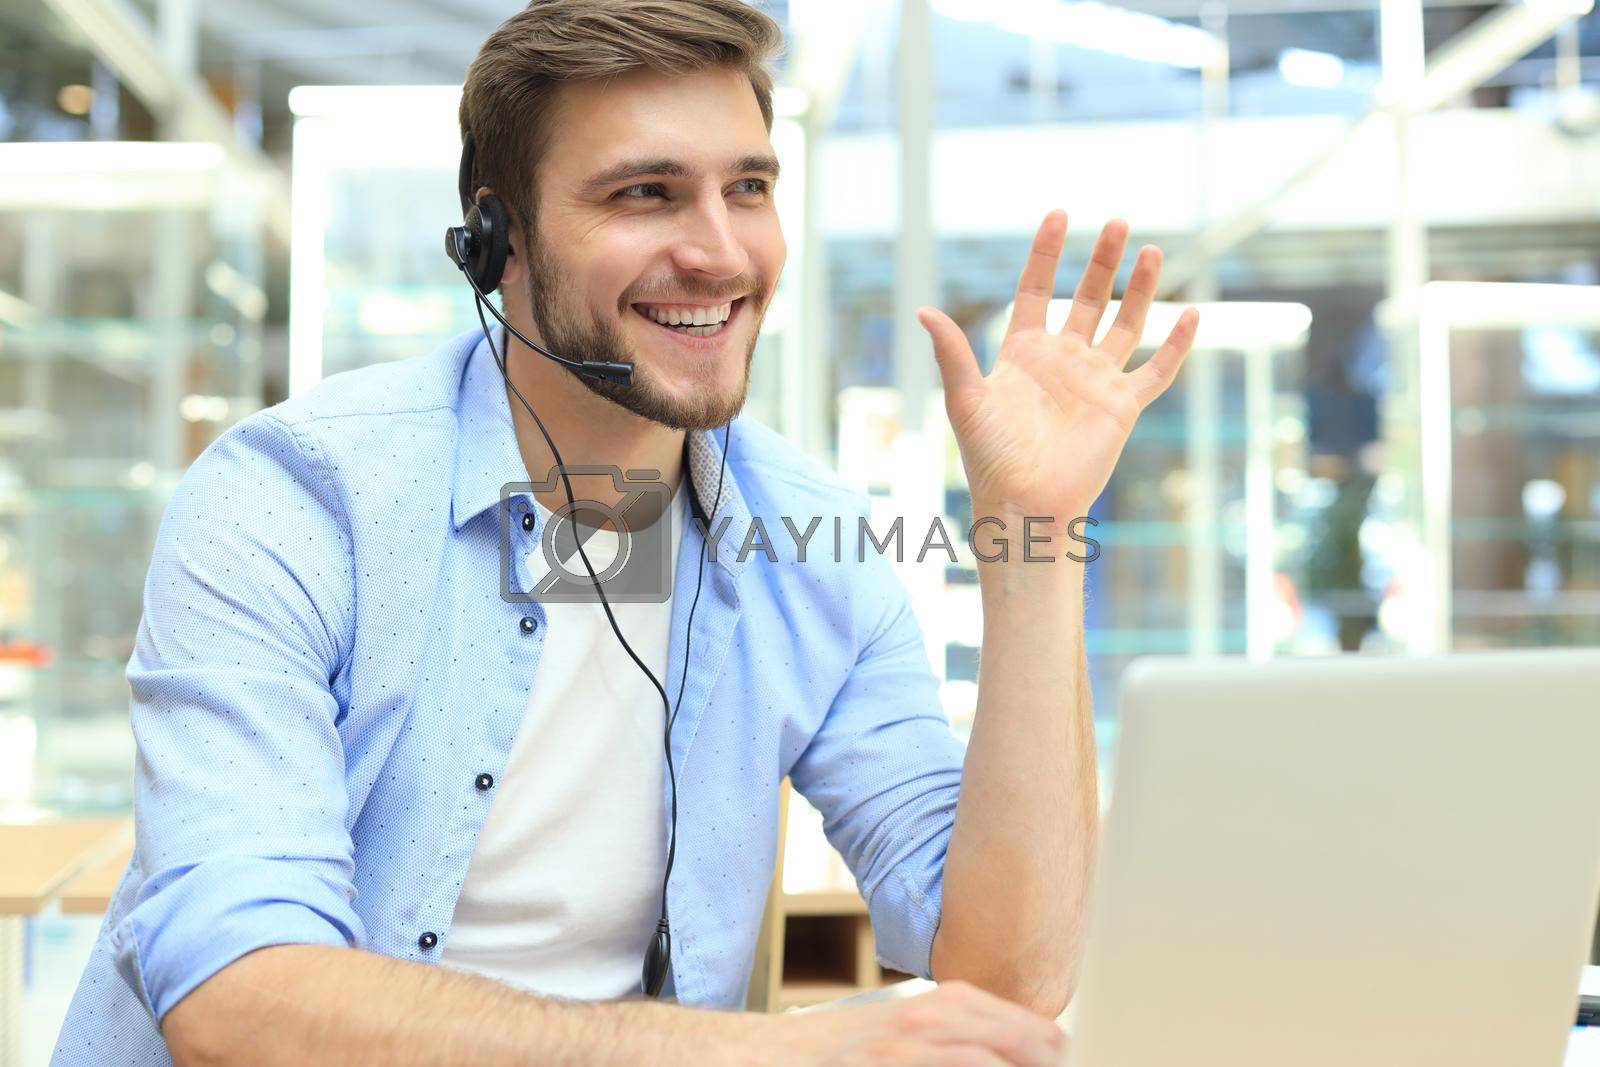 Royalty free image of Happy young male customer support executive working in office. by tsyhun